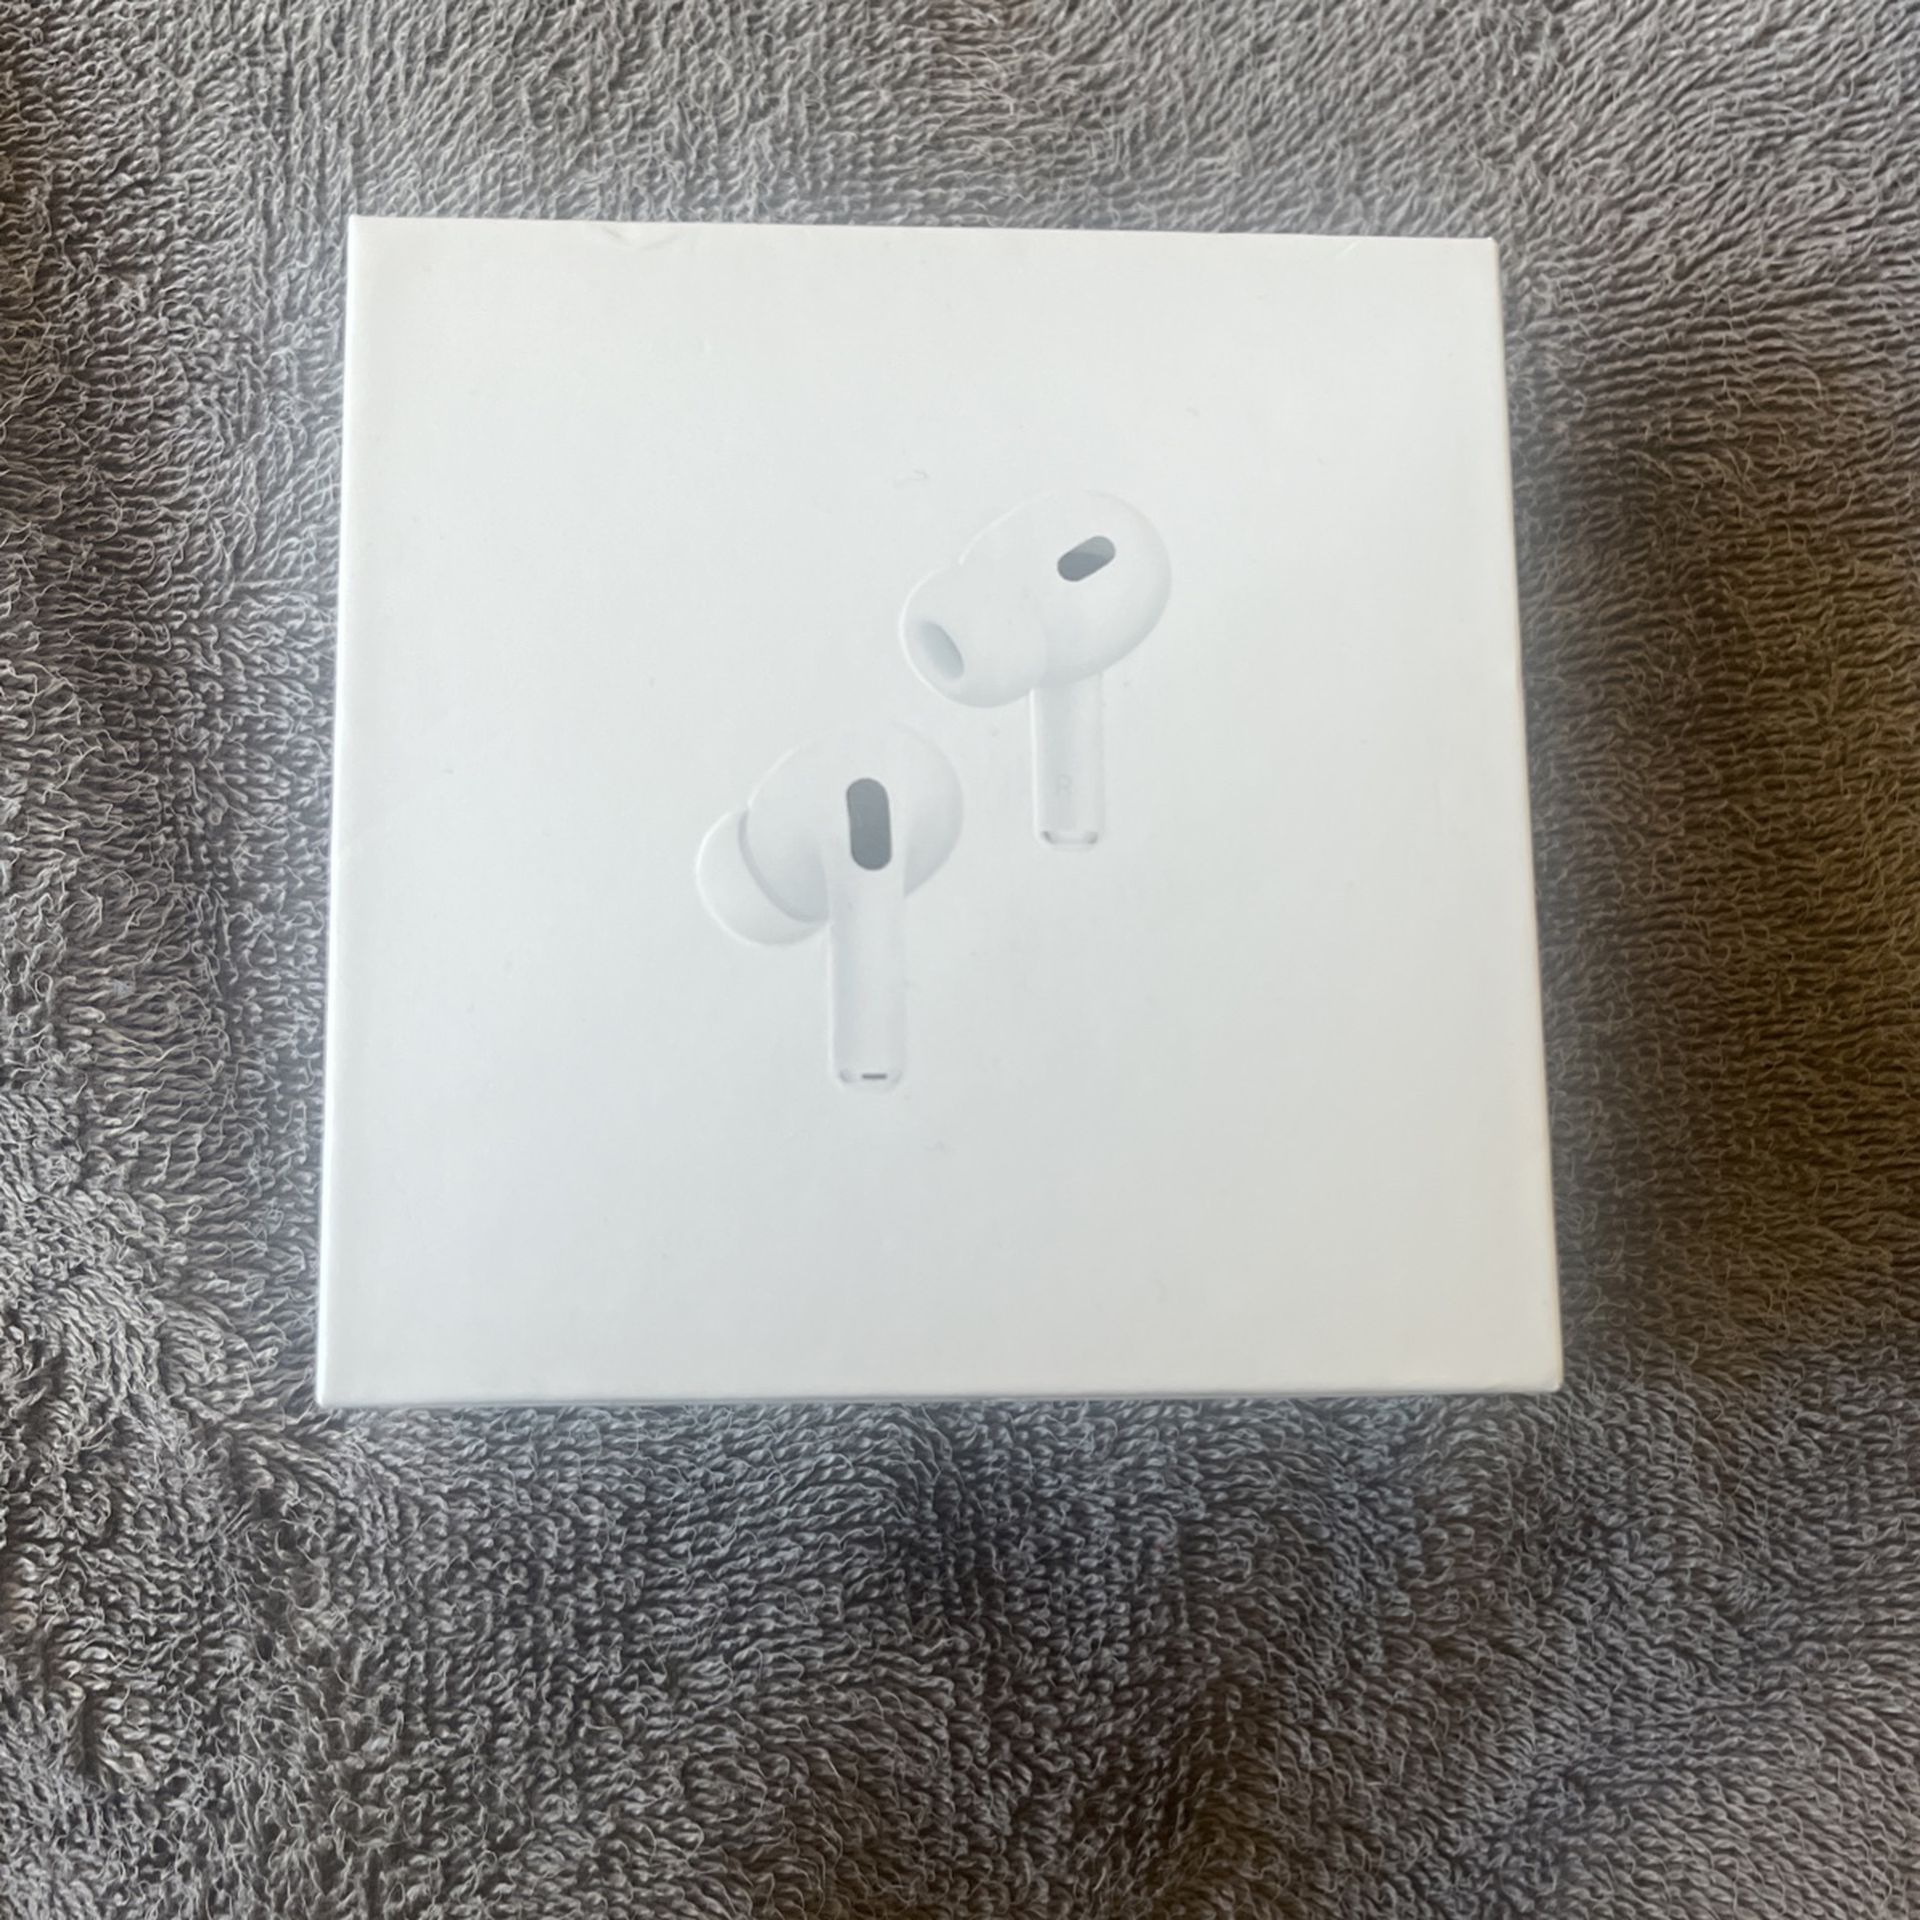 AirPod Pros 2nd Generation 